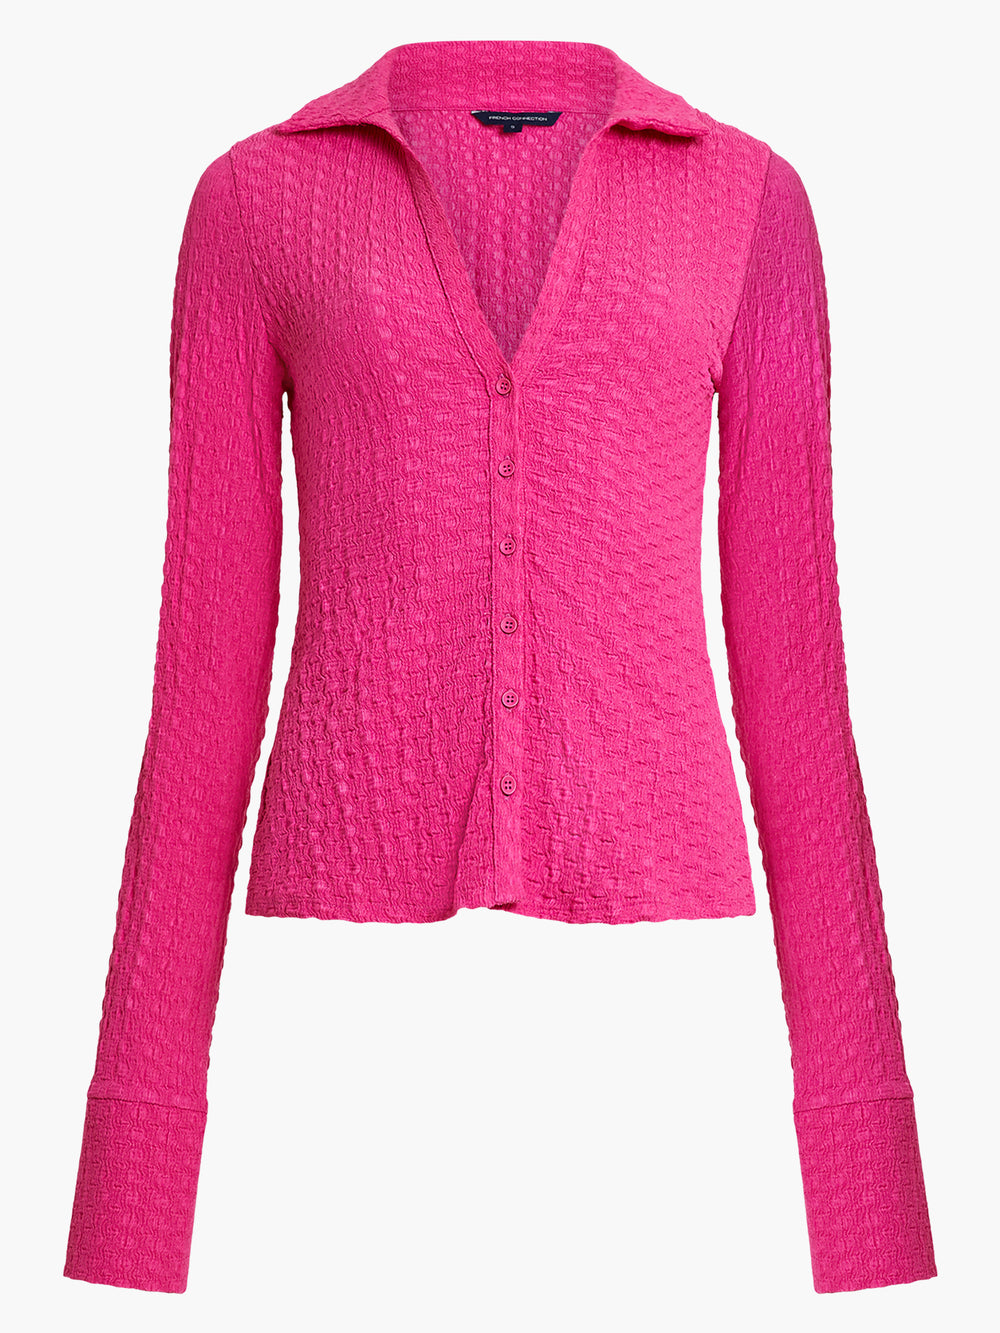 Tash Textured Top Fuschia | French Connection UK